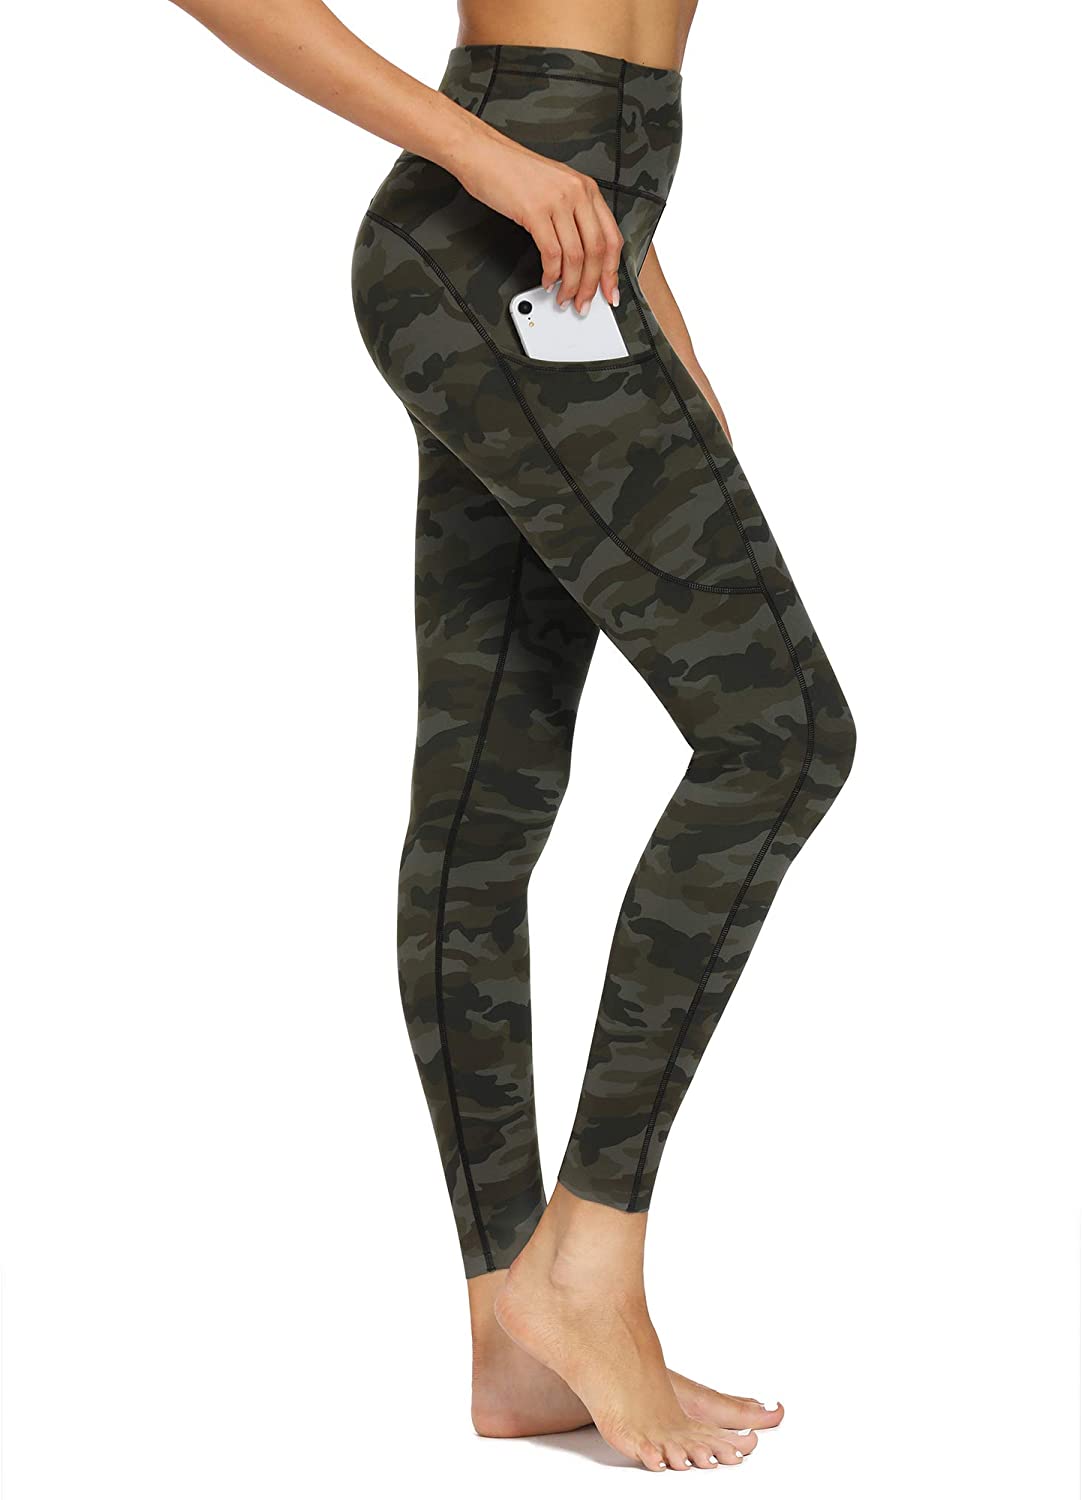  Houmous Women's 4 Out Pockets Buttery Soft High Waisted  Full-Length Yoga Pants(Black,XL) : Clothing, Shoes & Jewelry